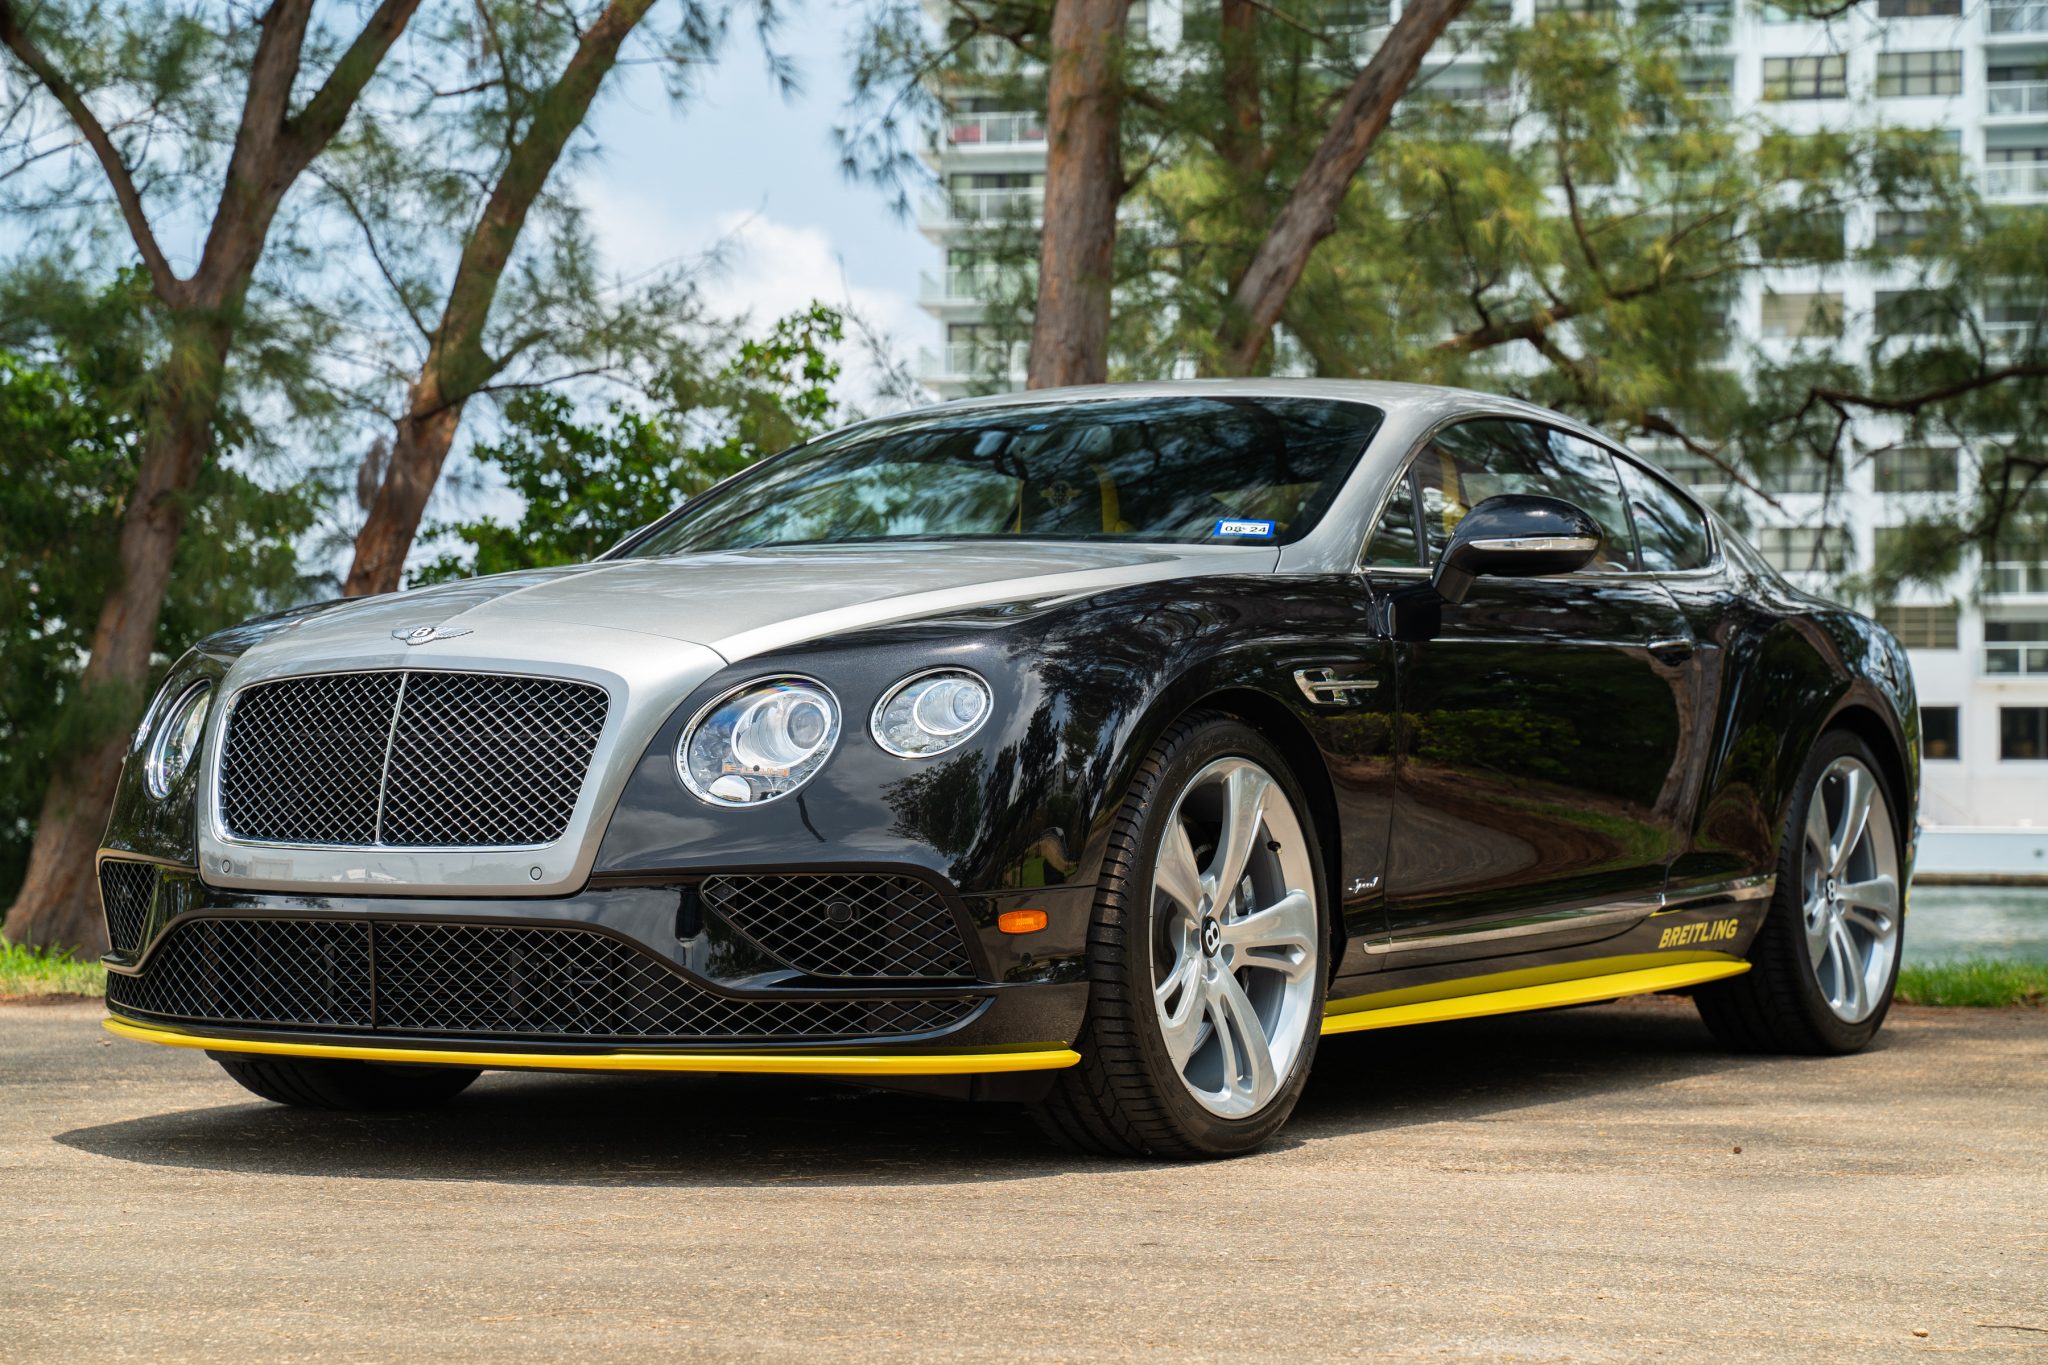 Used 843-Mile 2016 Bentley Continental GT Speed Breitling Jet Team Series Limited Edition Review